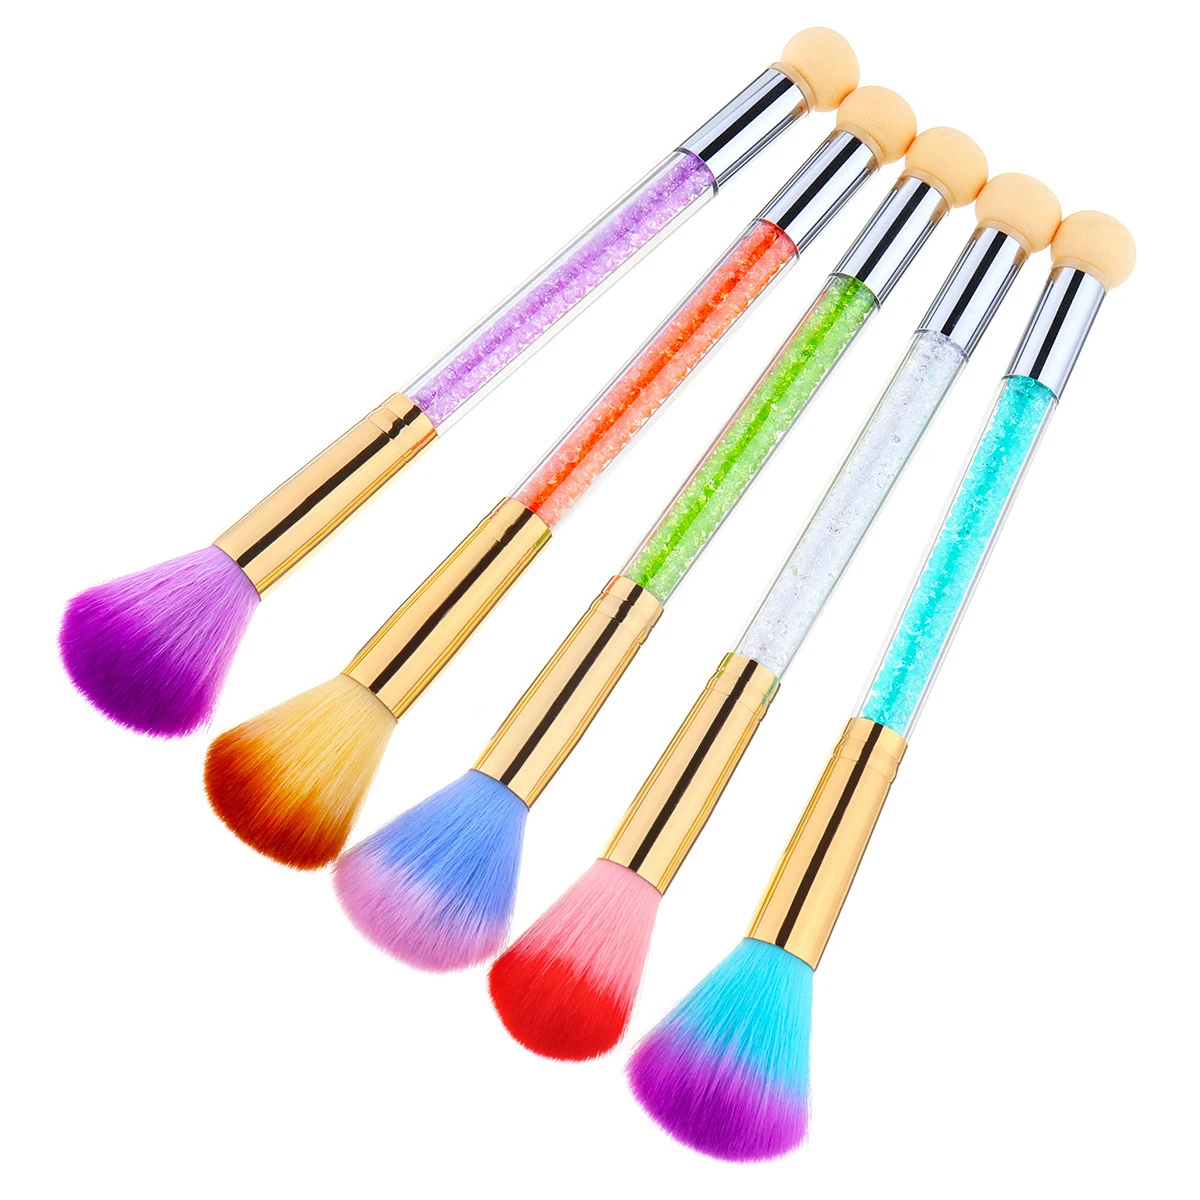 

2021 New Colorful Soft Makeup Tools Nail Brushes for Cleaning Powder Remover Nail Dust Cleaner Brush, Purple,blue